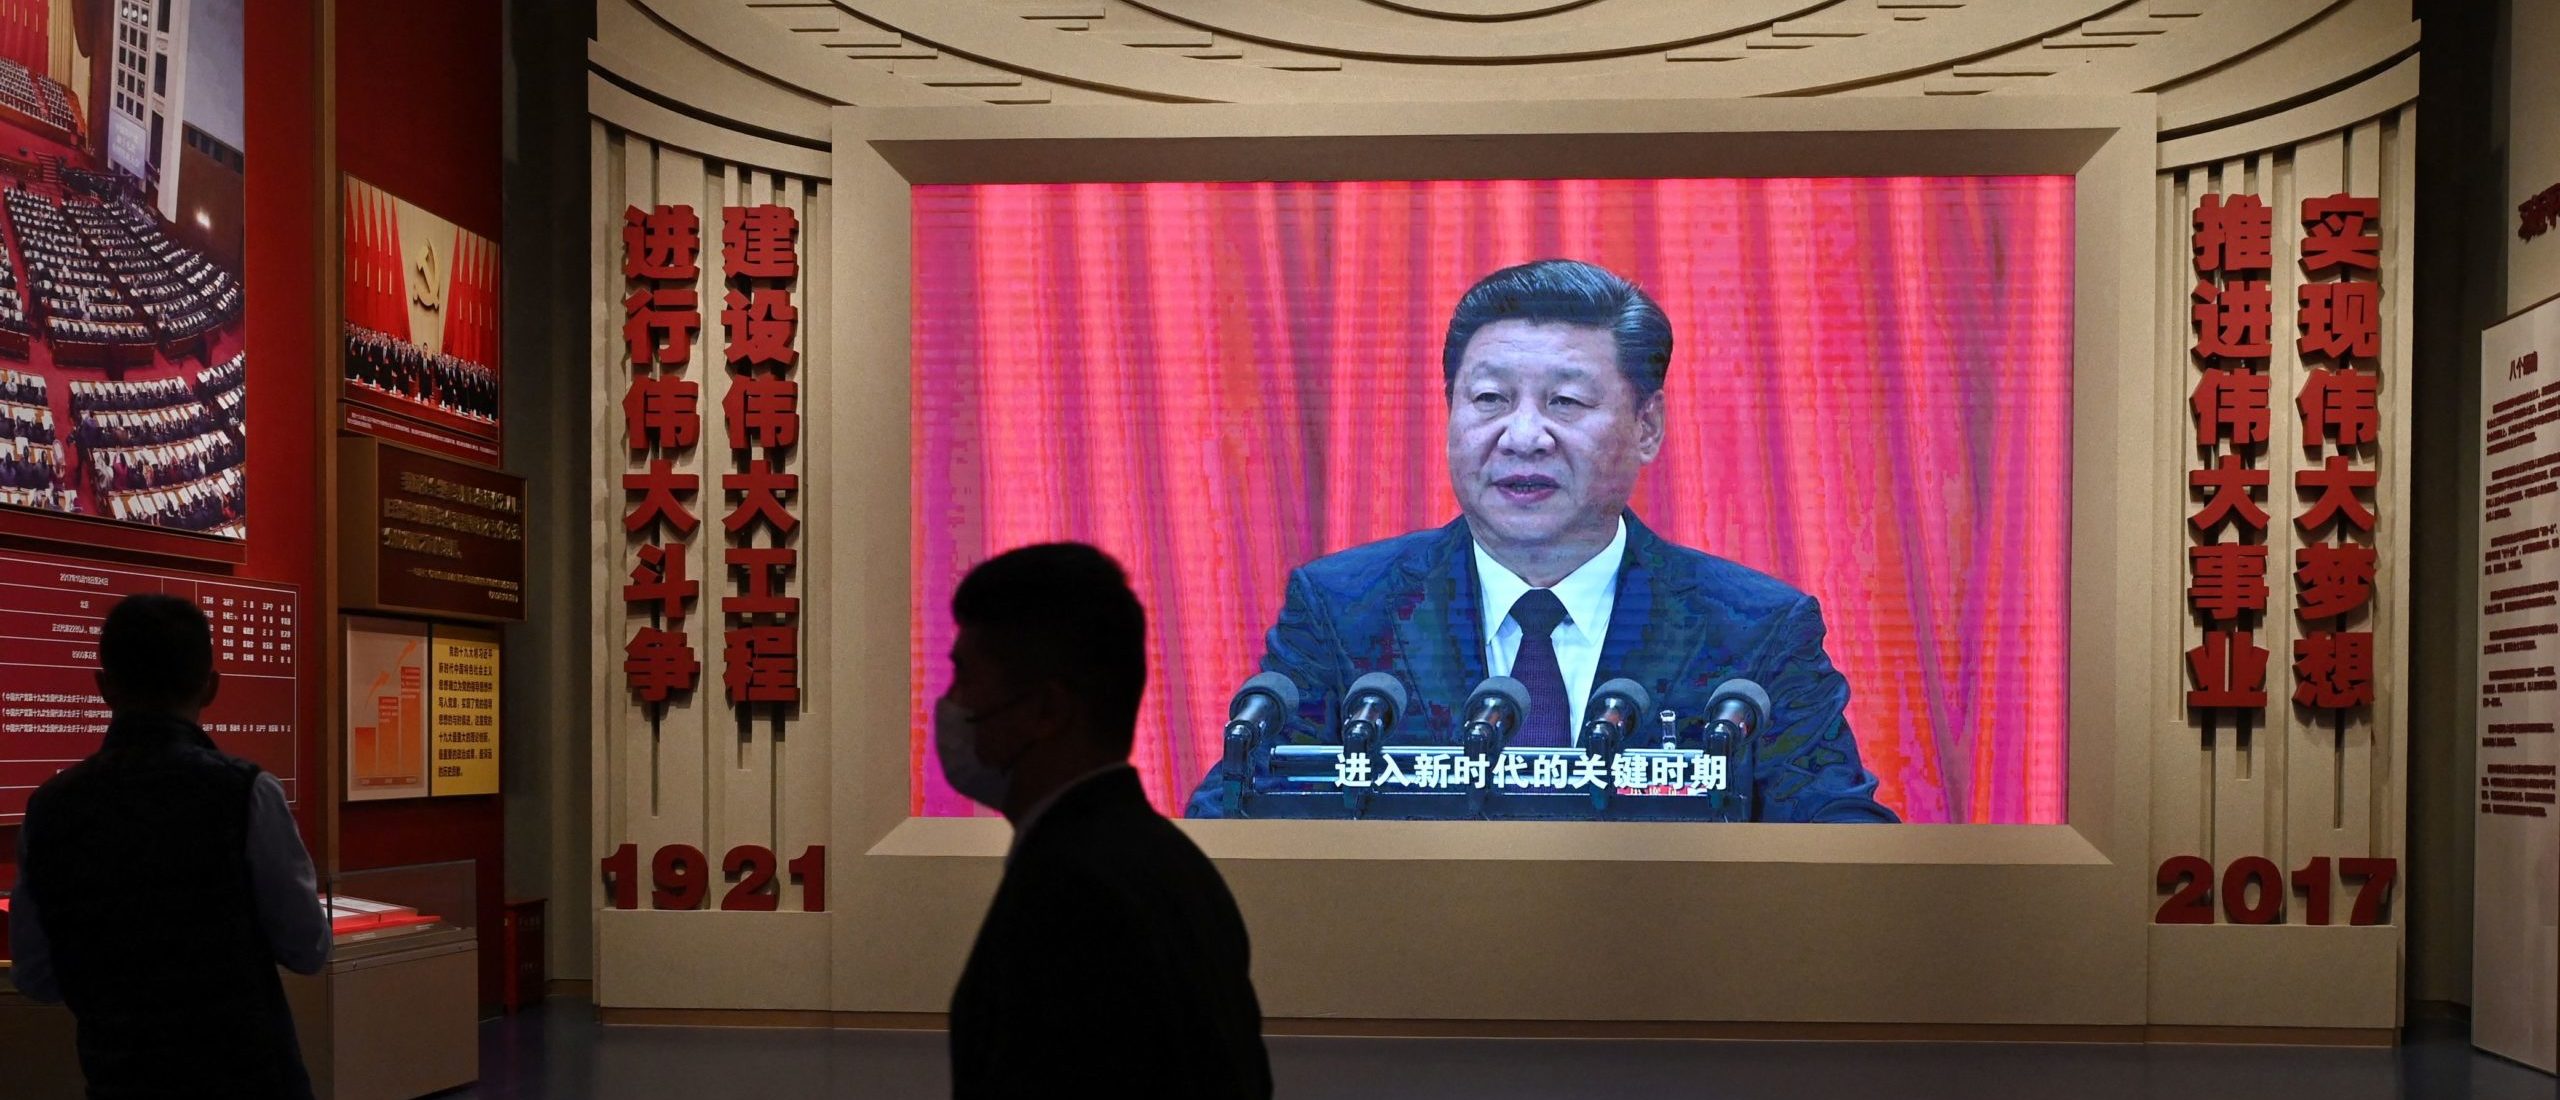 A man walks past a video screen showing a speech by Chinese President Xi Jinping at the Museum of the Communist Party of China in Beijing on March 3, 2023, ahead of the opening of the annual session of the National Peoples Congress on March 5. (Photo by GREG BAKER / AFP) 